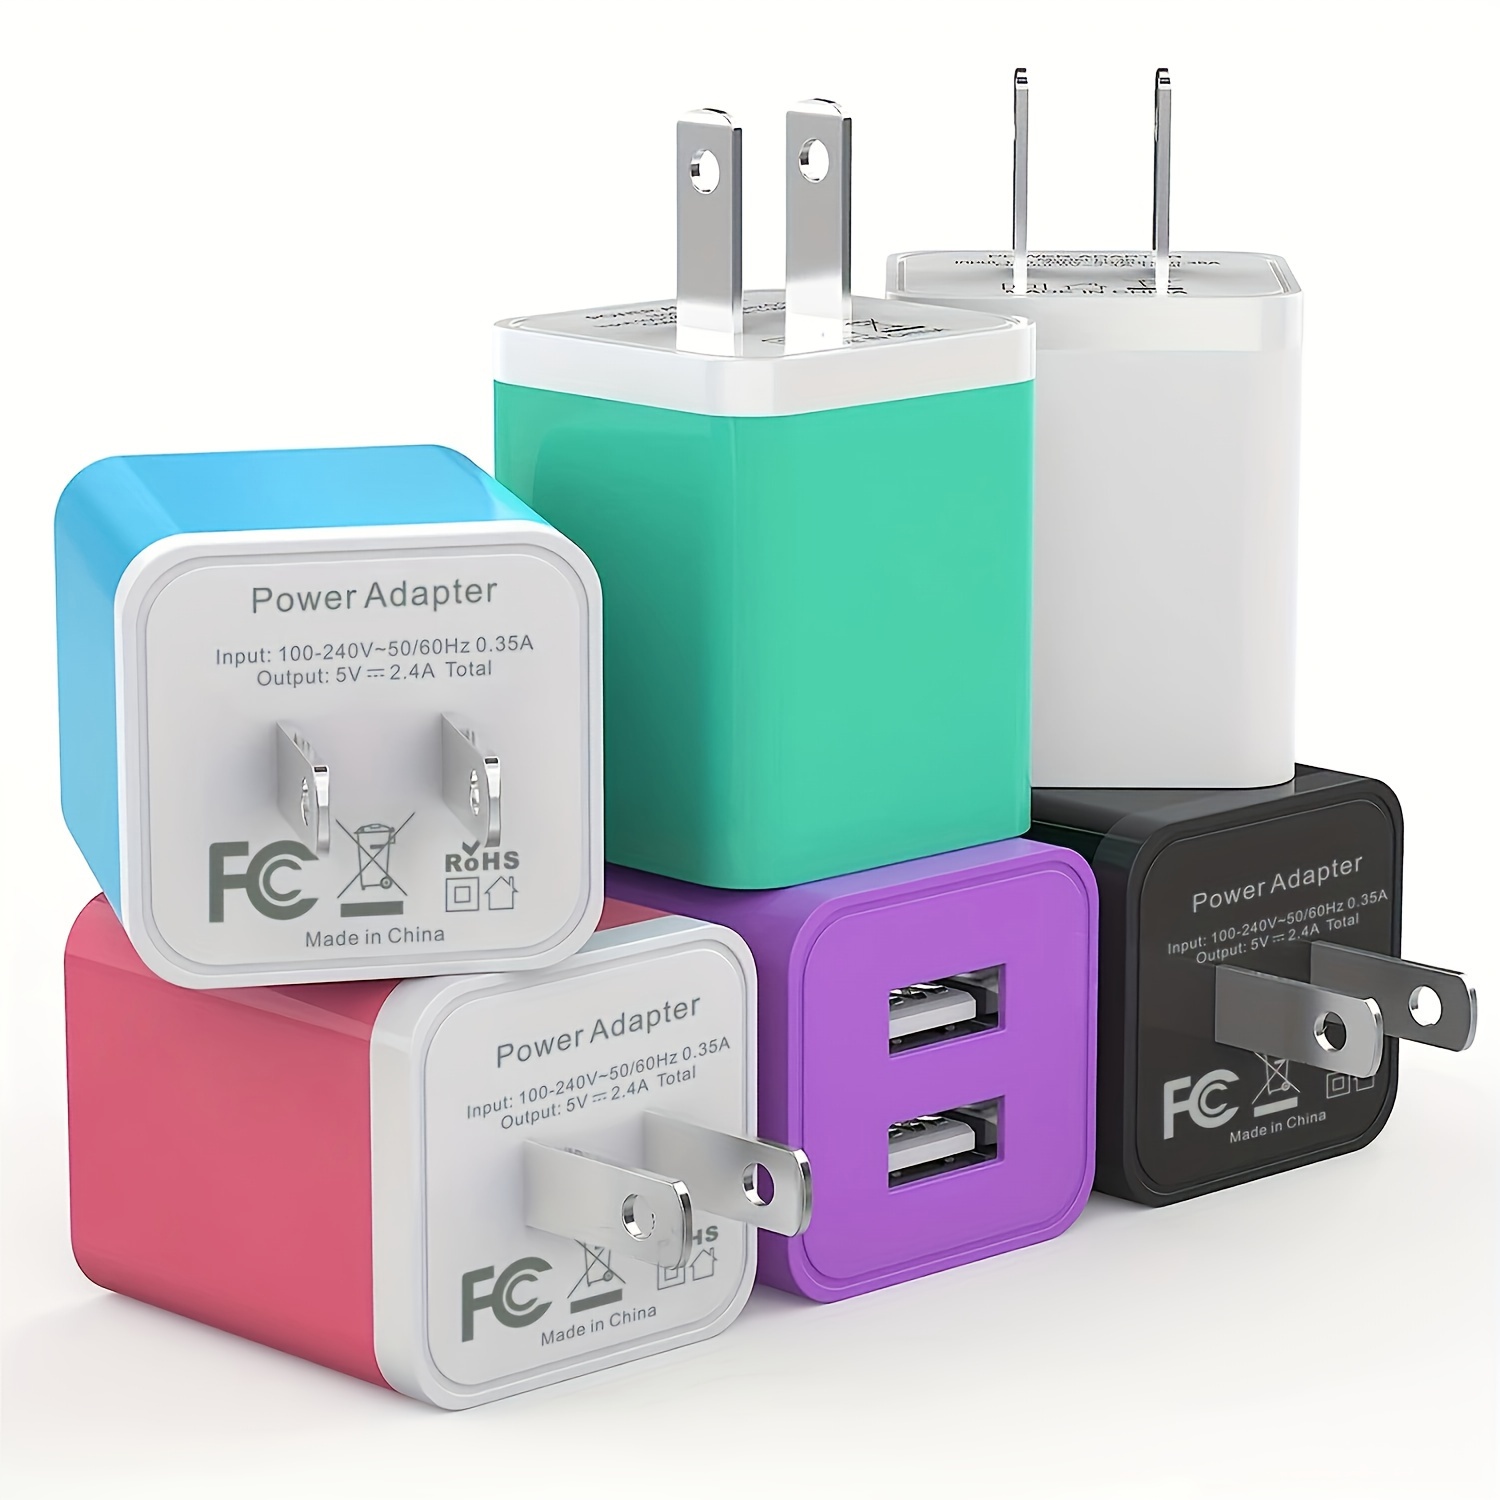 

6 Color 5v 2.1a Dual Usb Port Wall Charger, Latest Cube Plug Adapter Fast Phone Charger Block Charging Box Tiles, For Iphone 1514/14pro/14pro Max/13, Samsung Galaxy, Pixel, Lg, Android